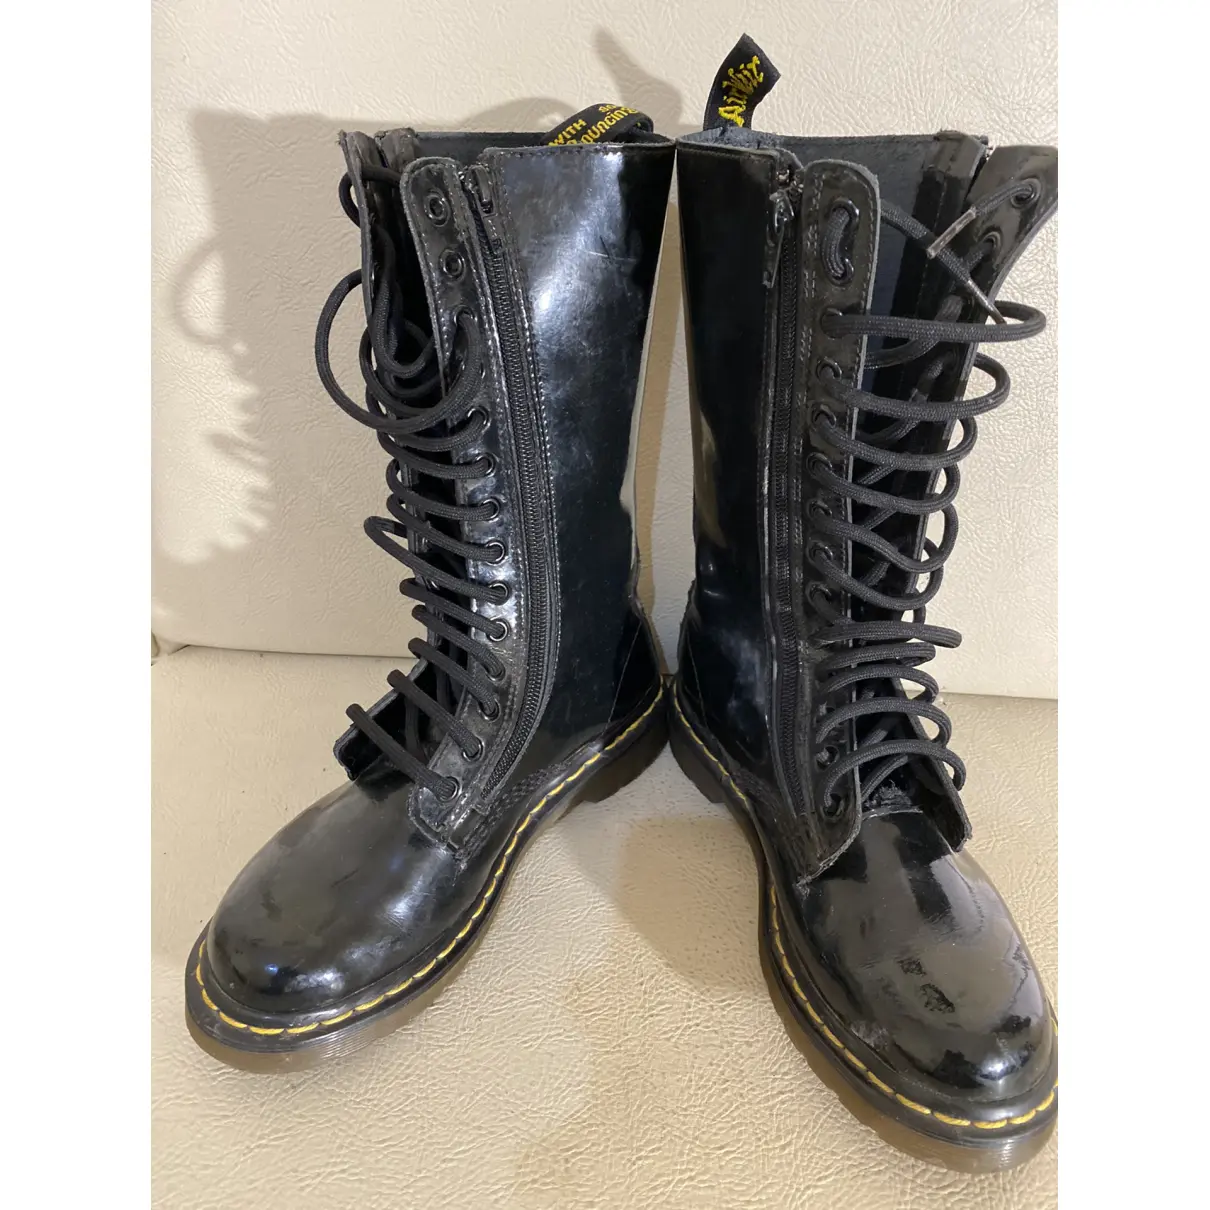 Buy Dr. Martens Patent leather ankle boots online